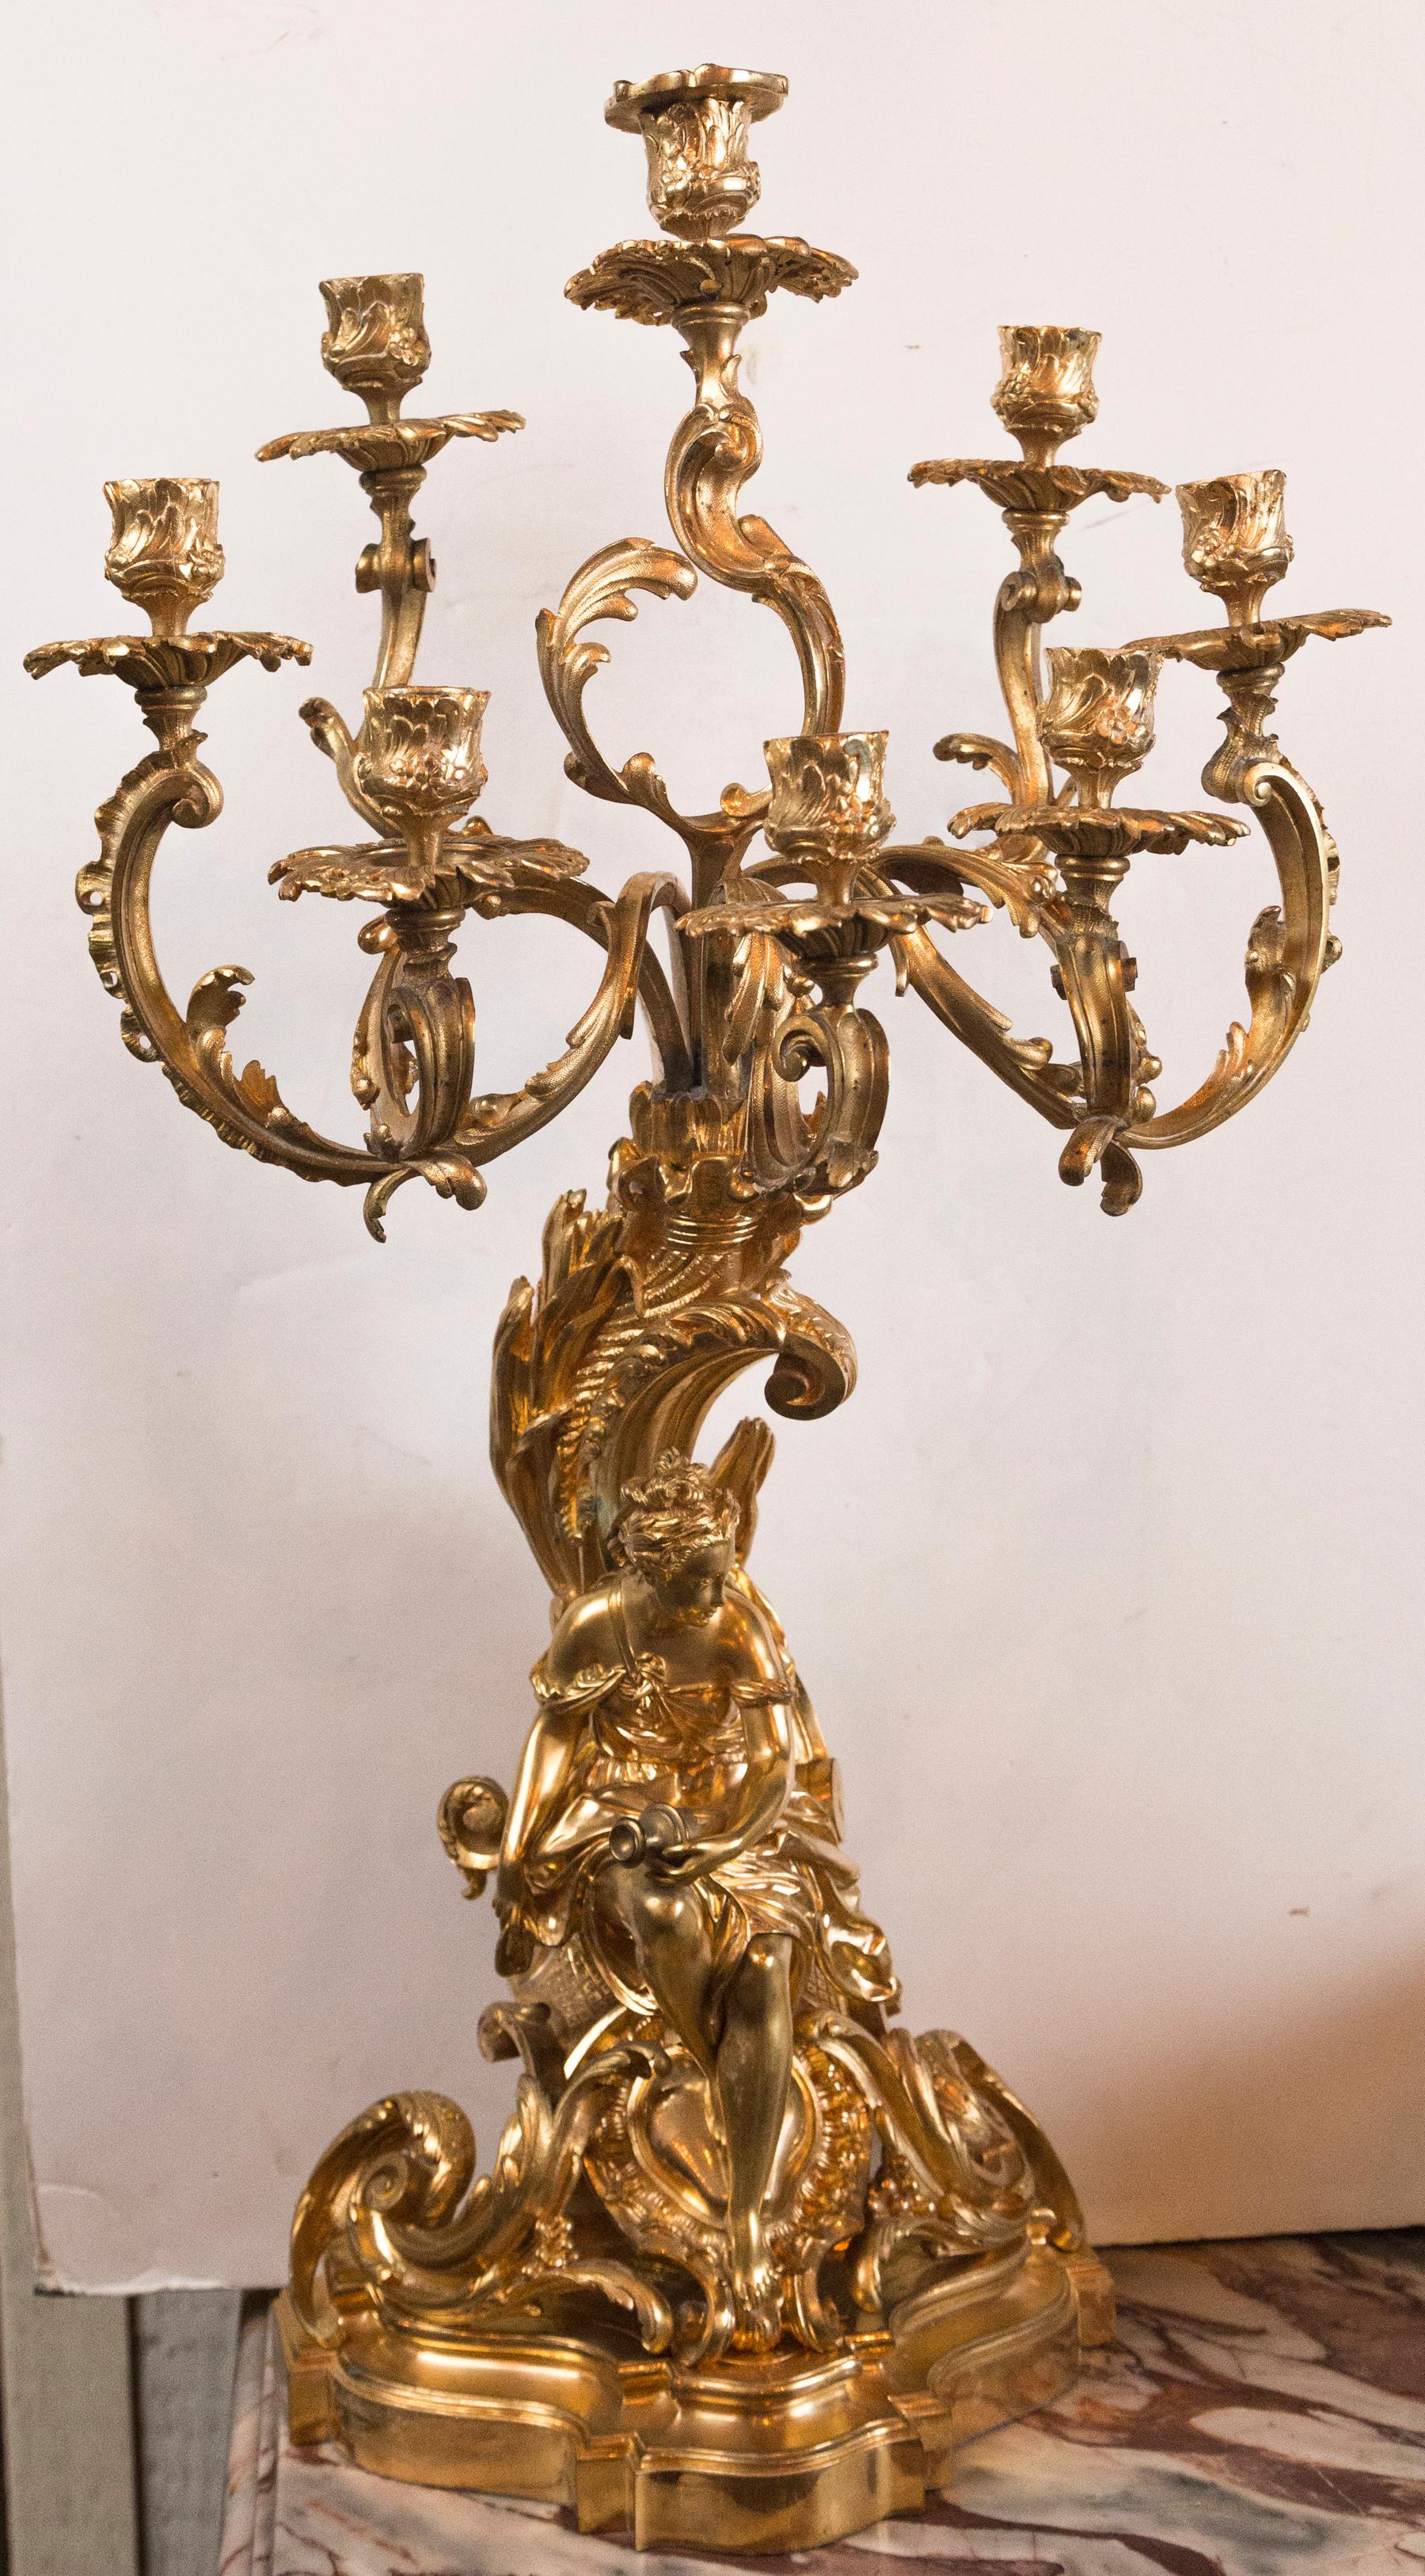 Made in 2 parts. The candelabra fits into the large candle cup above the seated female figure. She holds a wine jug at her knee in her left hand. She wears a loose fitting covering and sits upon scrolls of the Louis XV/Rococo style. The entire